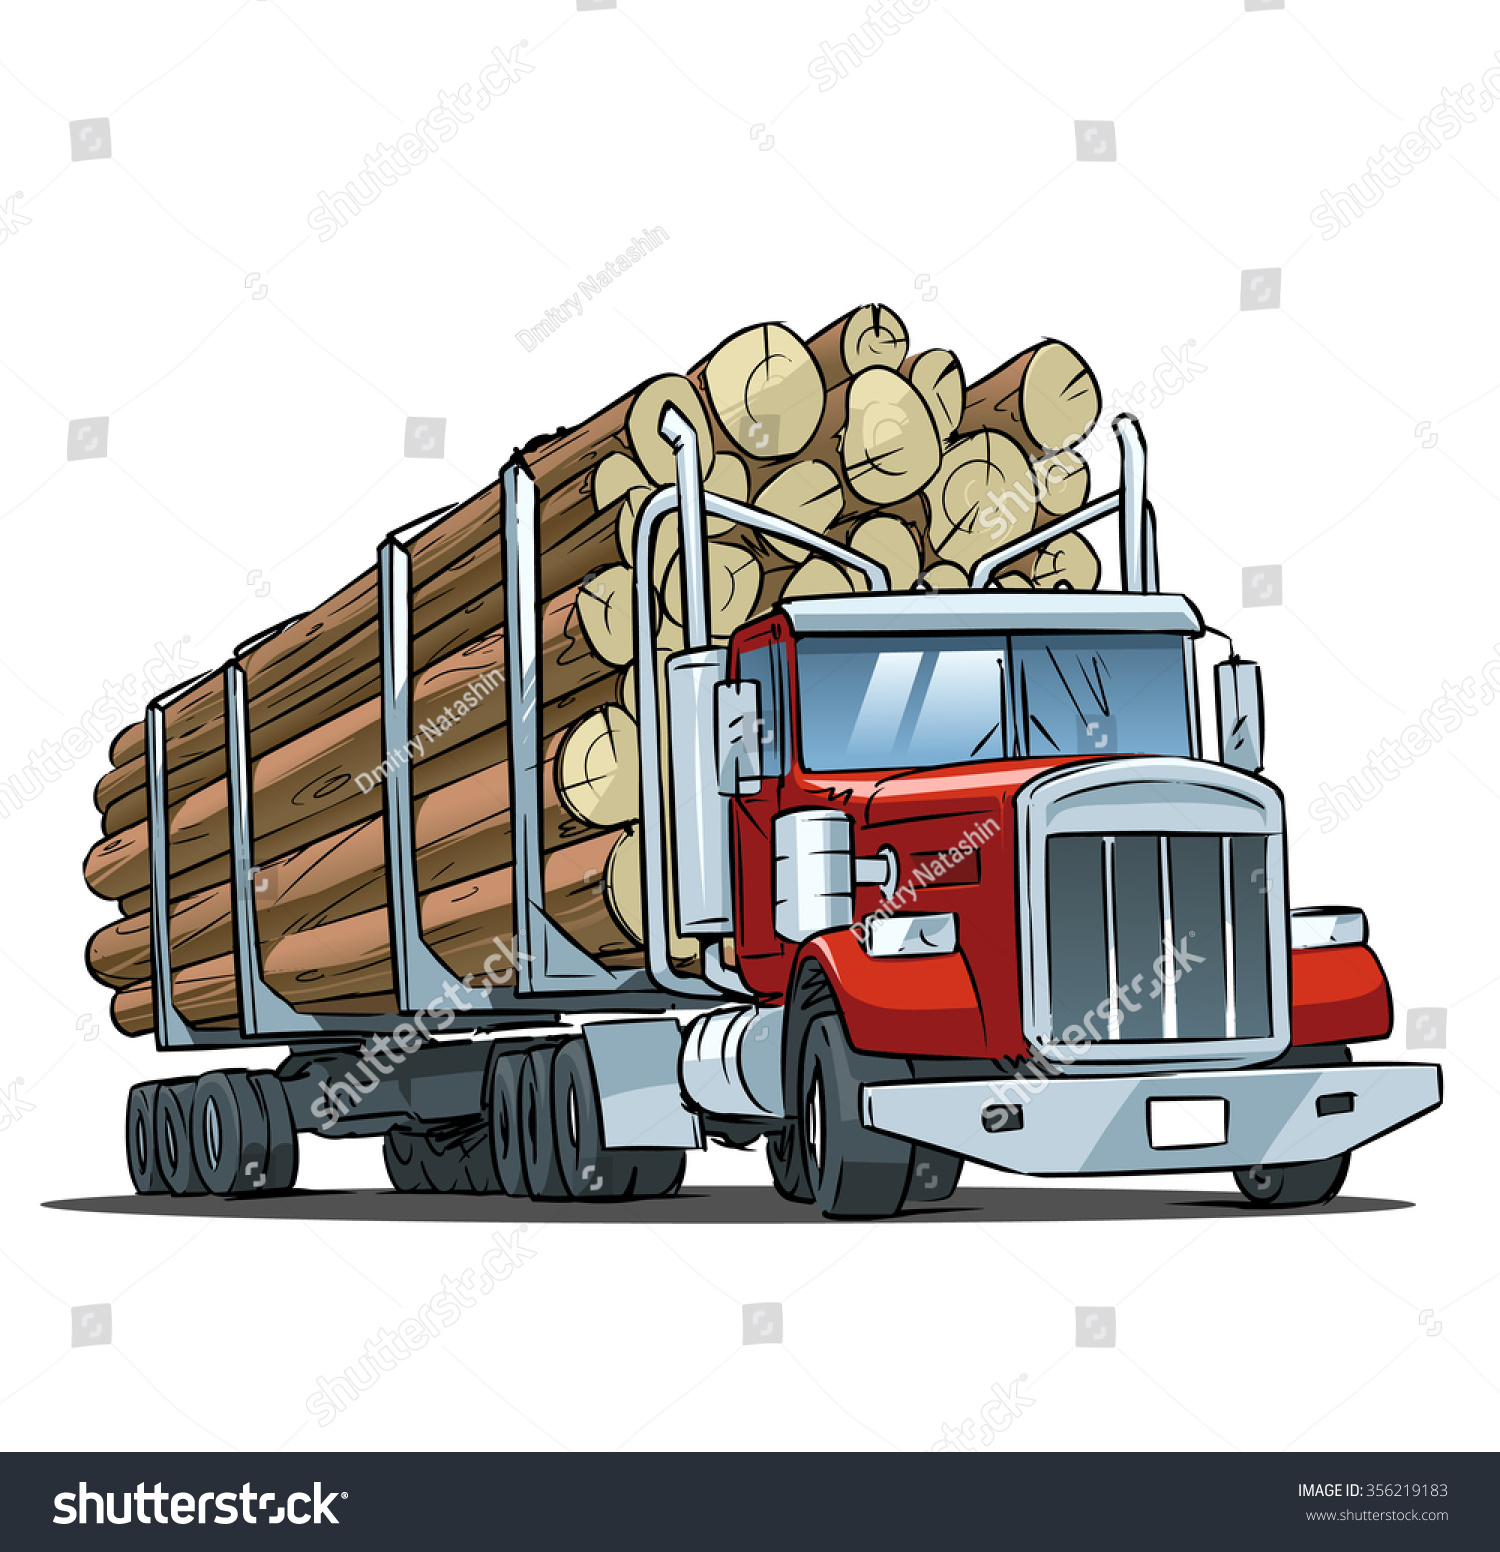 Download Logging Truck Isolated On White Background Stock Vector ...